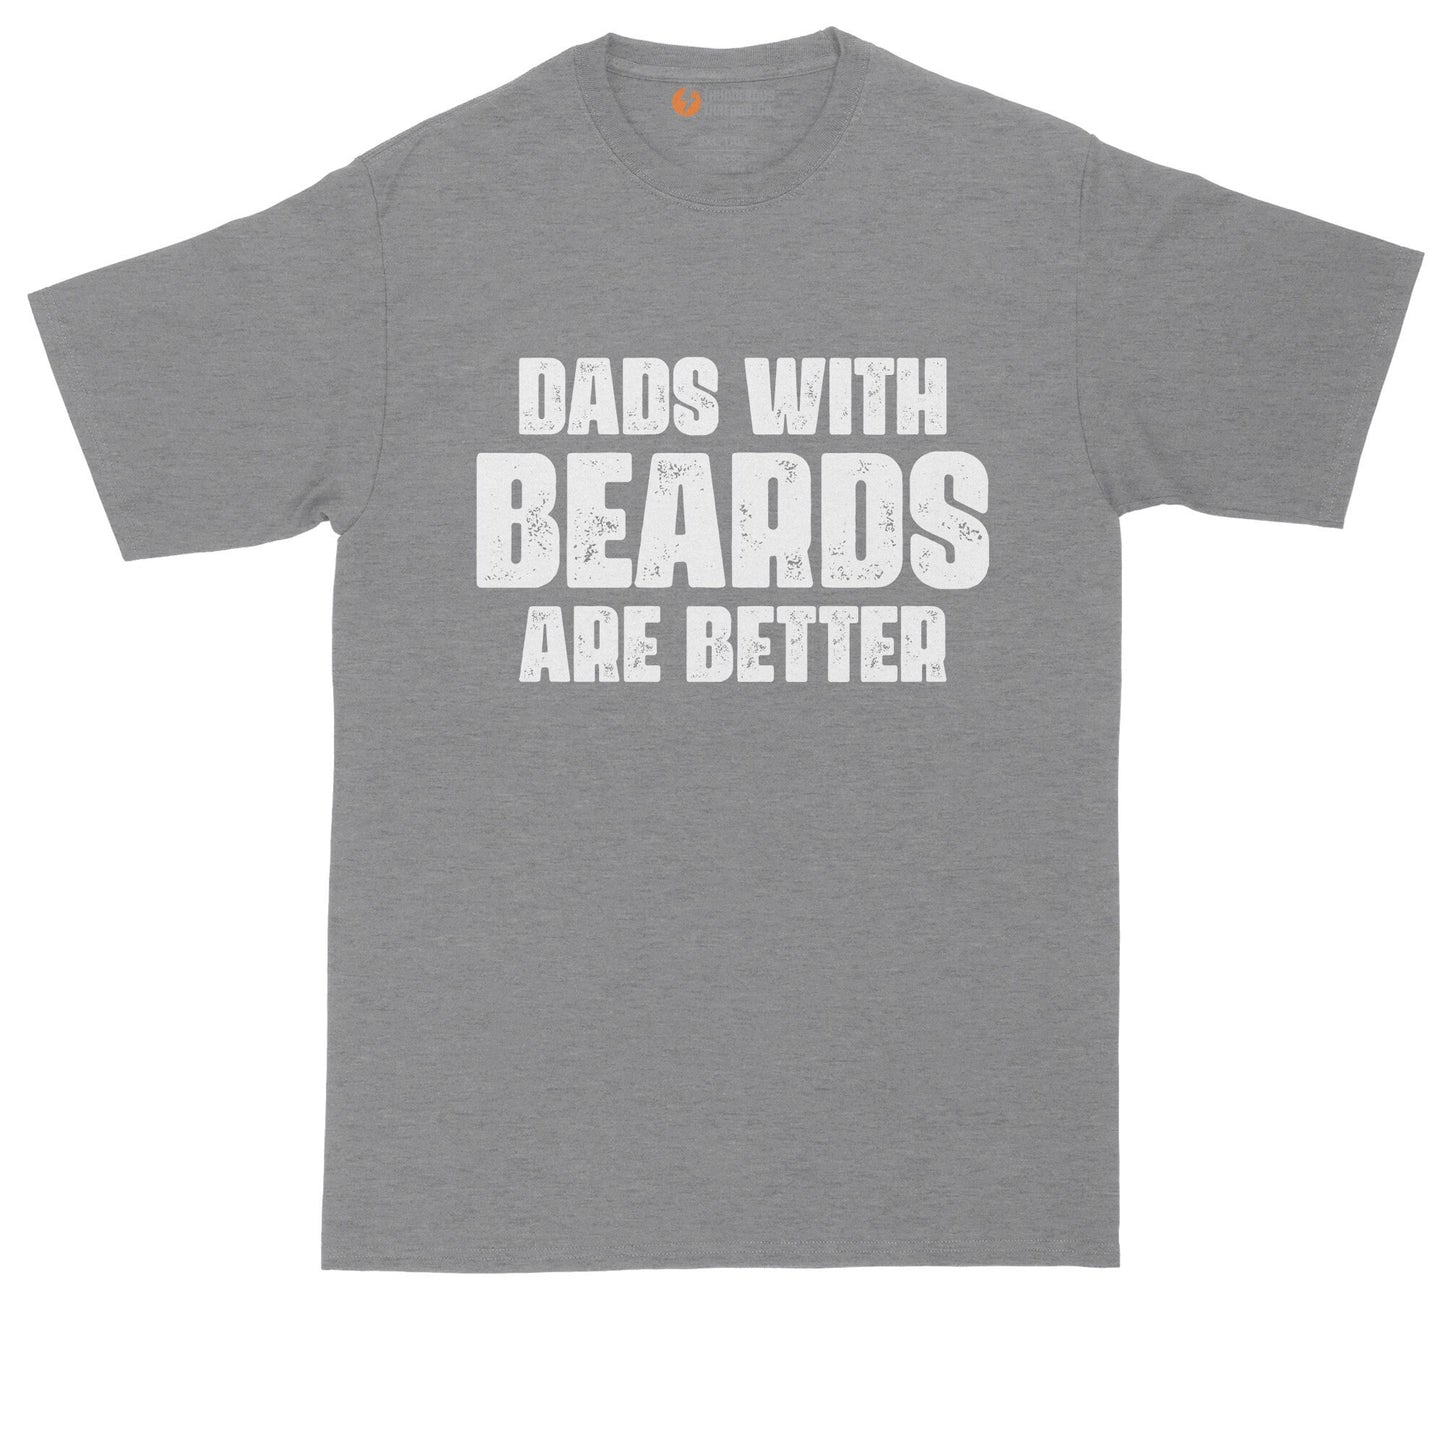 Dads with Beards are Better | Funny Shirt | Fathers Day Gift | Mens Big & Tall T-Shirt